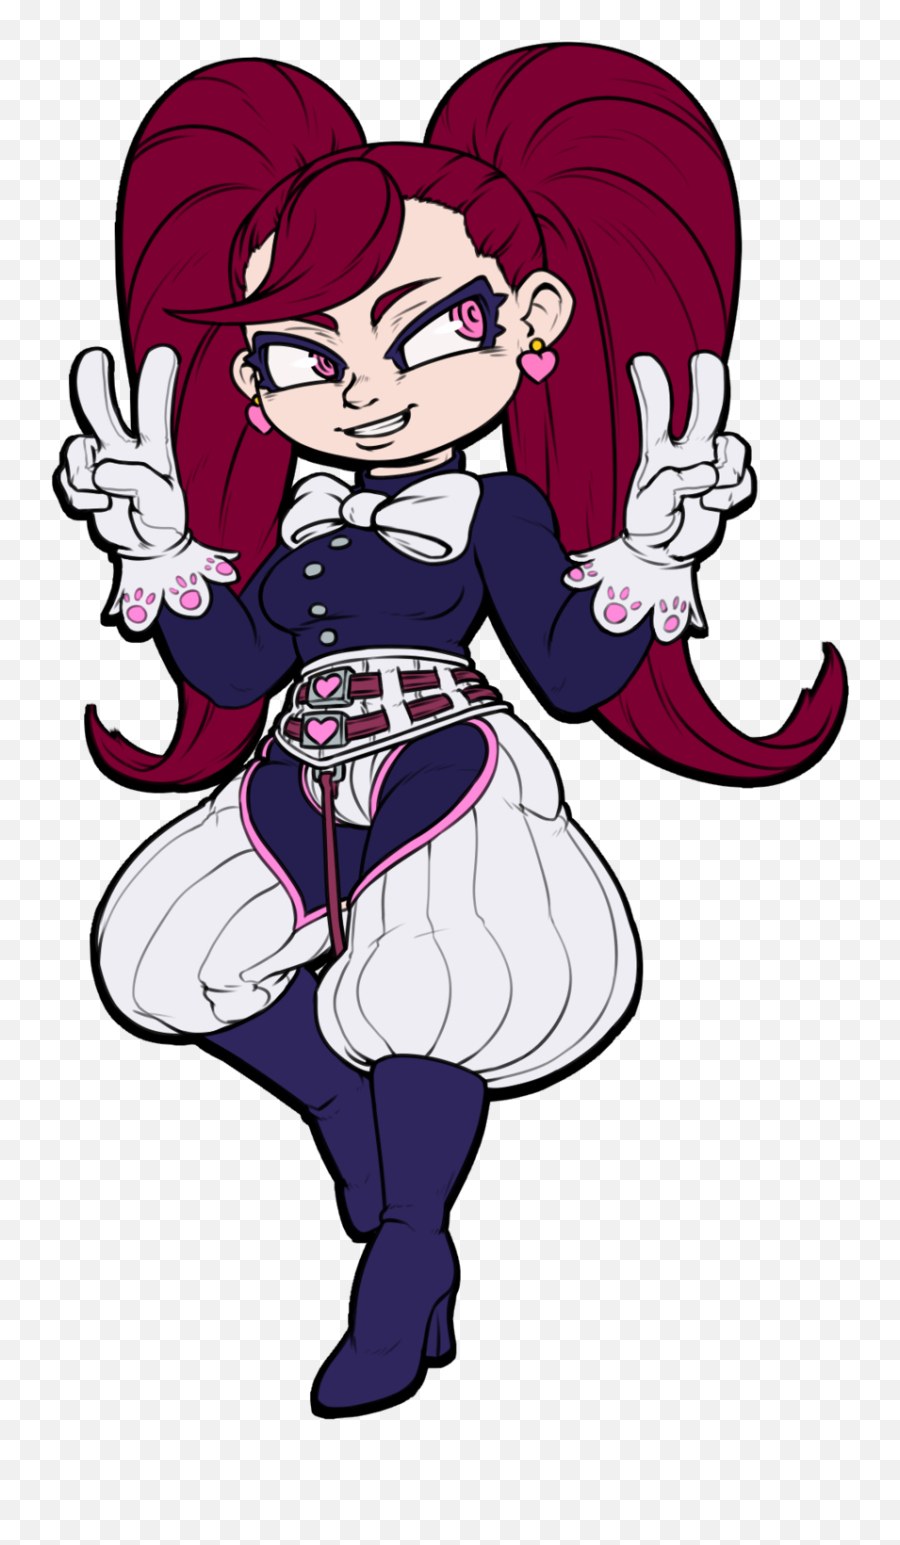 Download New Shortie Gal In Bnha No Official Color Scheme - Fictional Character Emoji,Bnha Logo